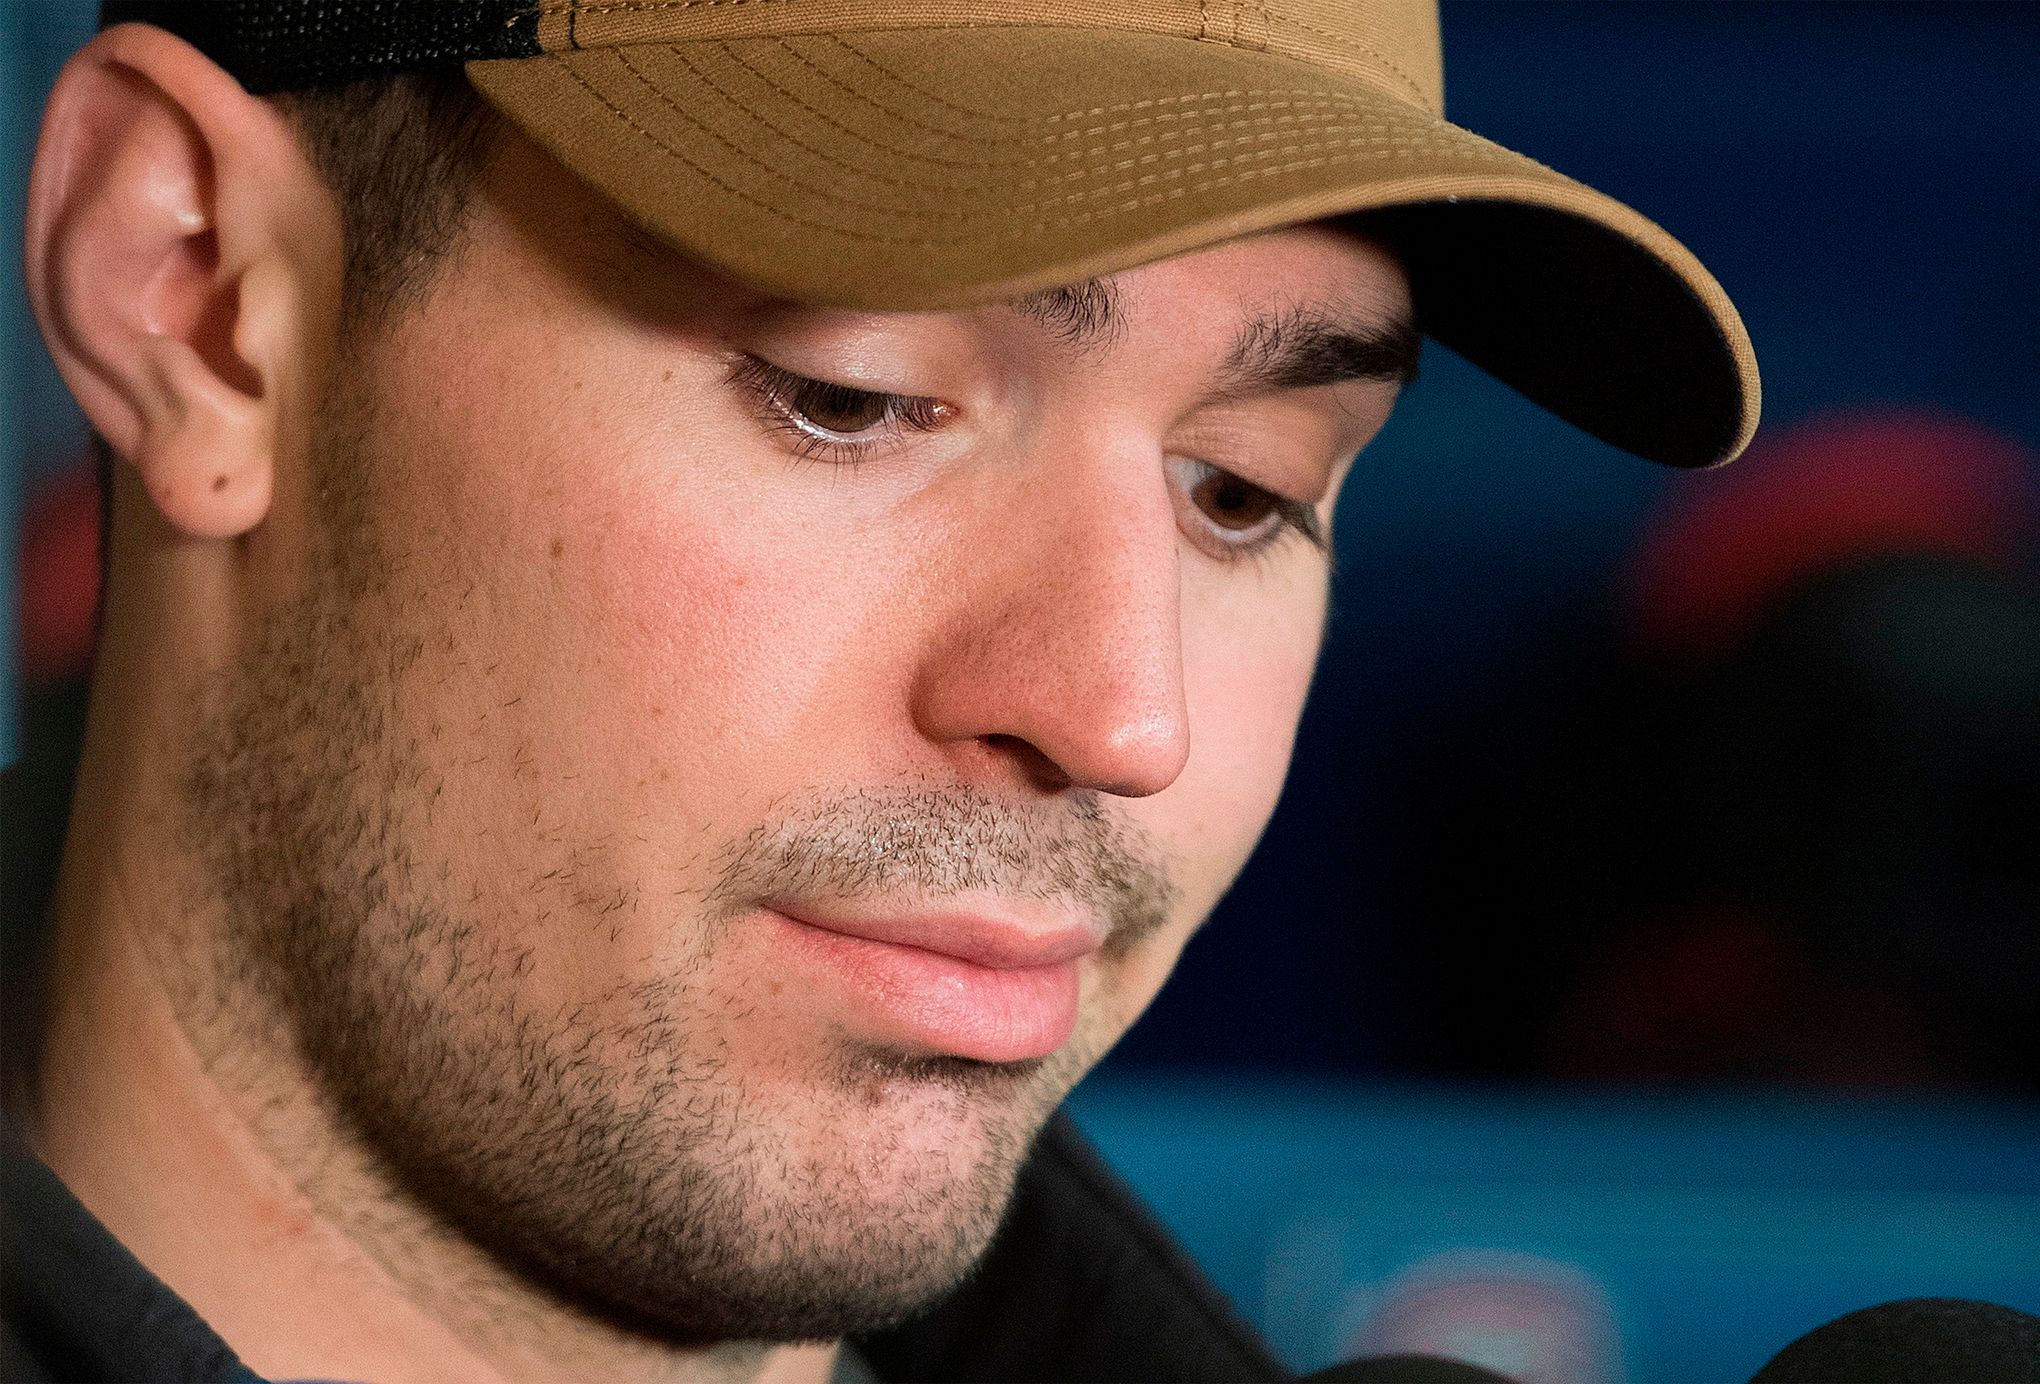 Canadiens goalie Carey Price enters player assistance program as family  stresses importance of mental health